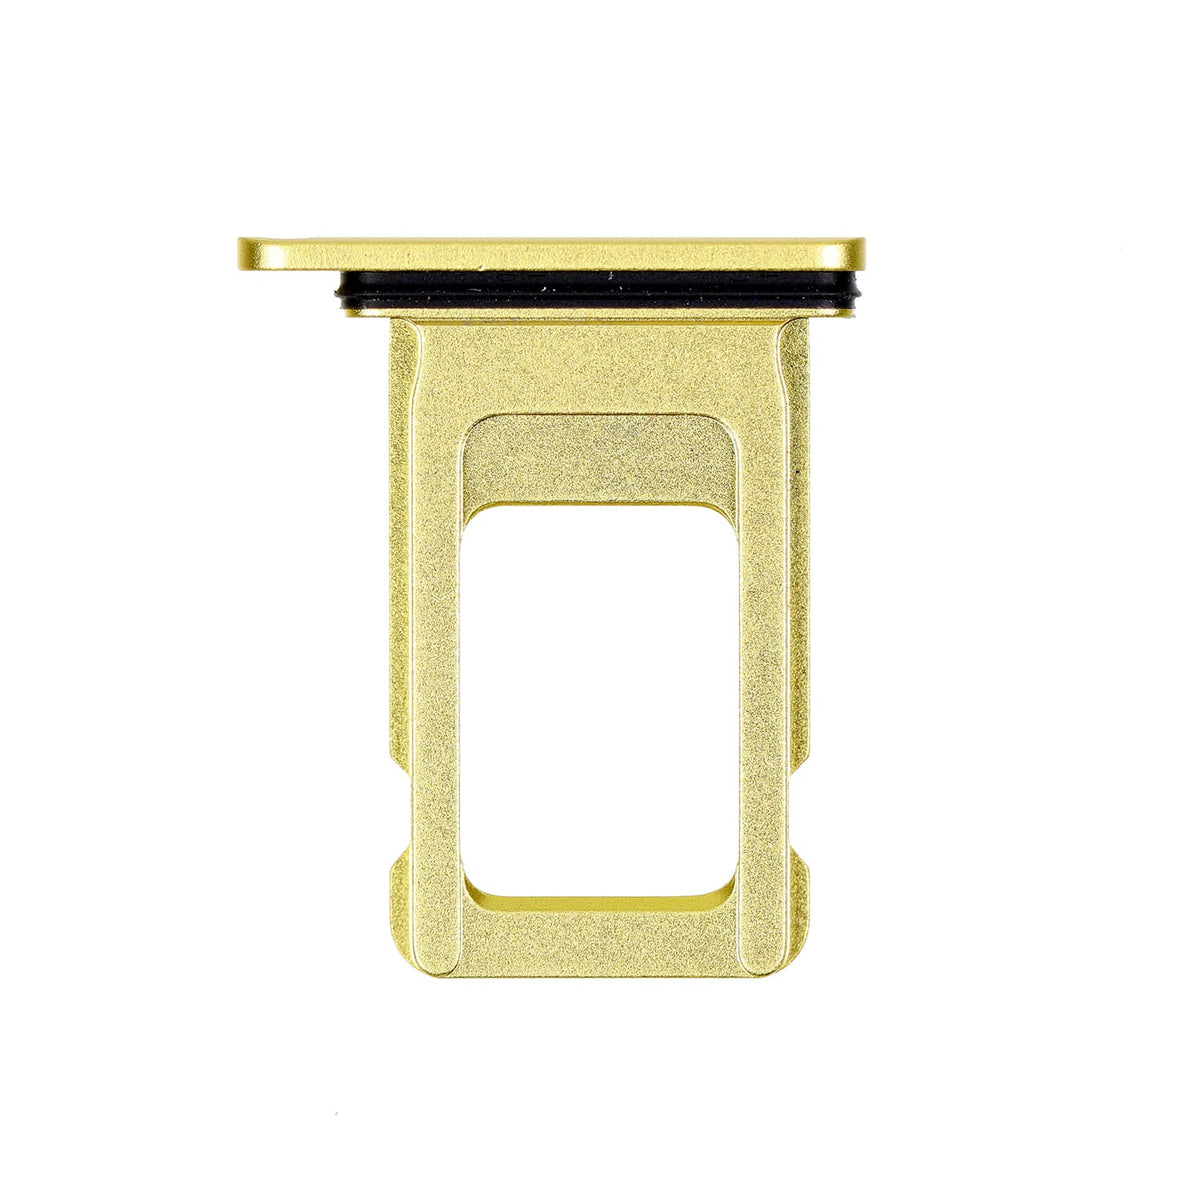 YELLOW SINGLE SIM CARD TRAY FOR IPHONE 11